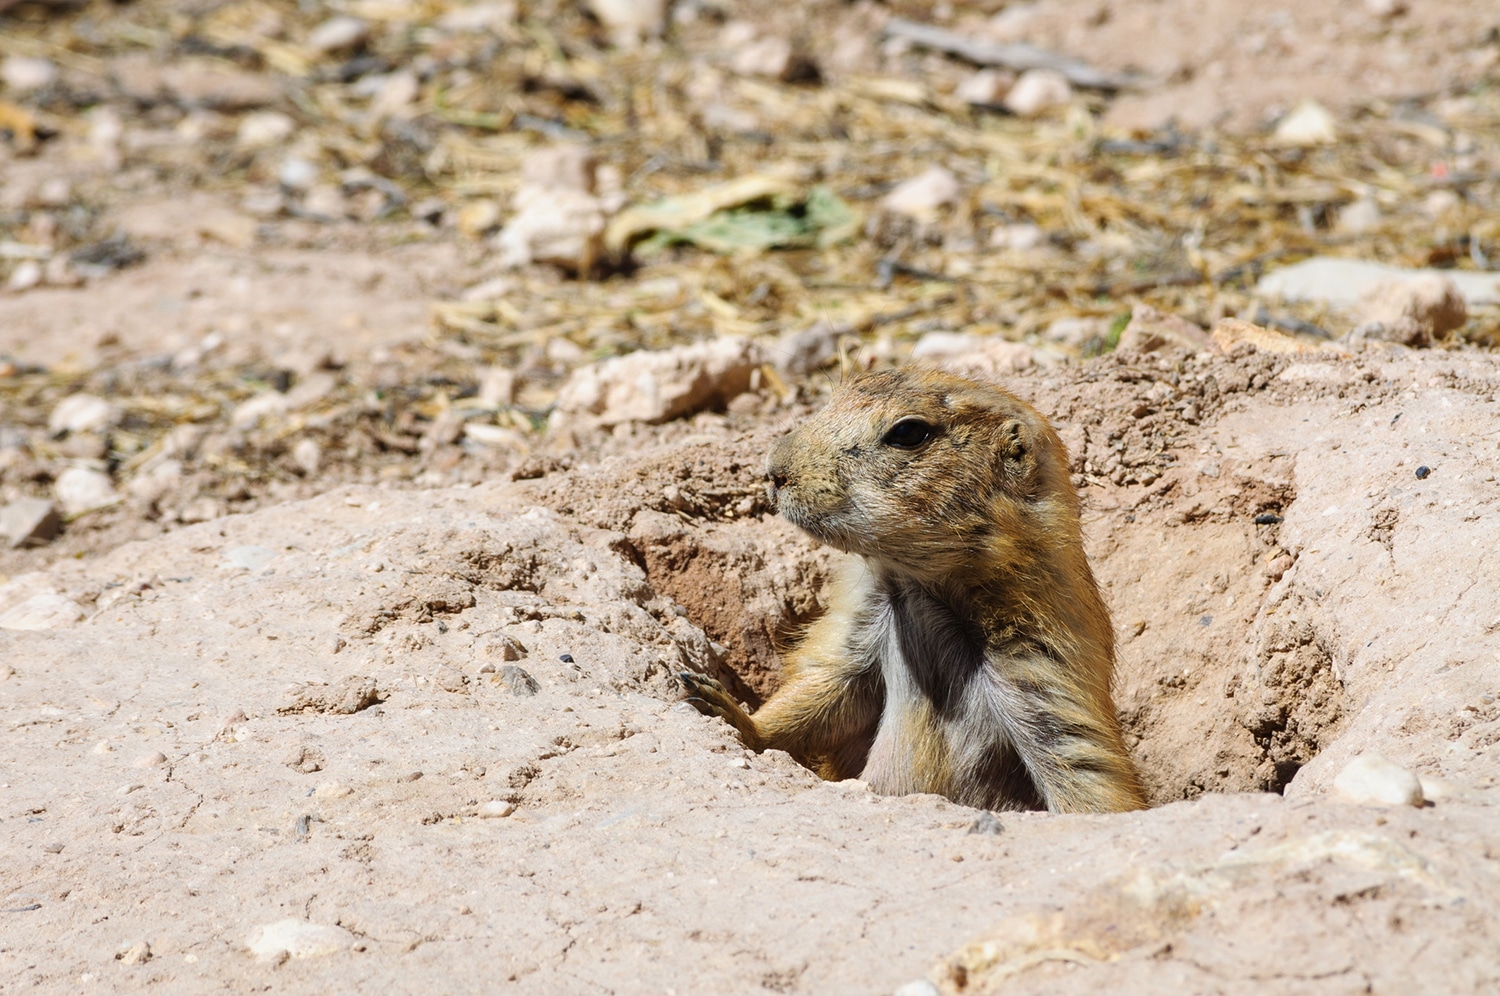 A prairie dog emerges from a hole to scope the surroundings.